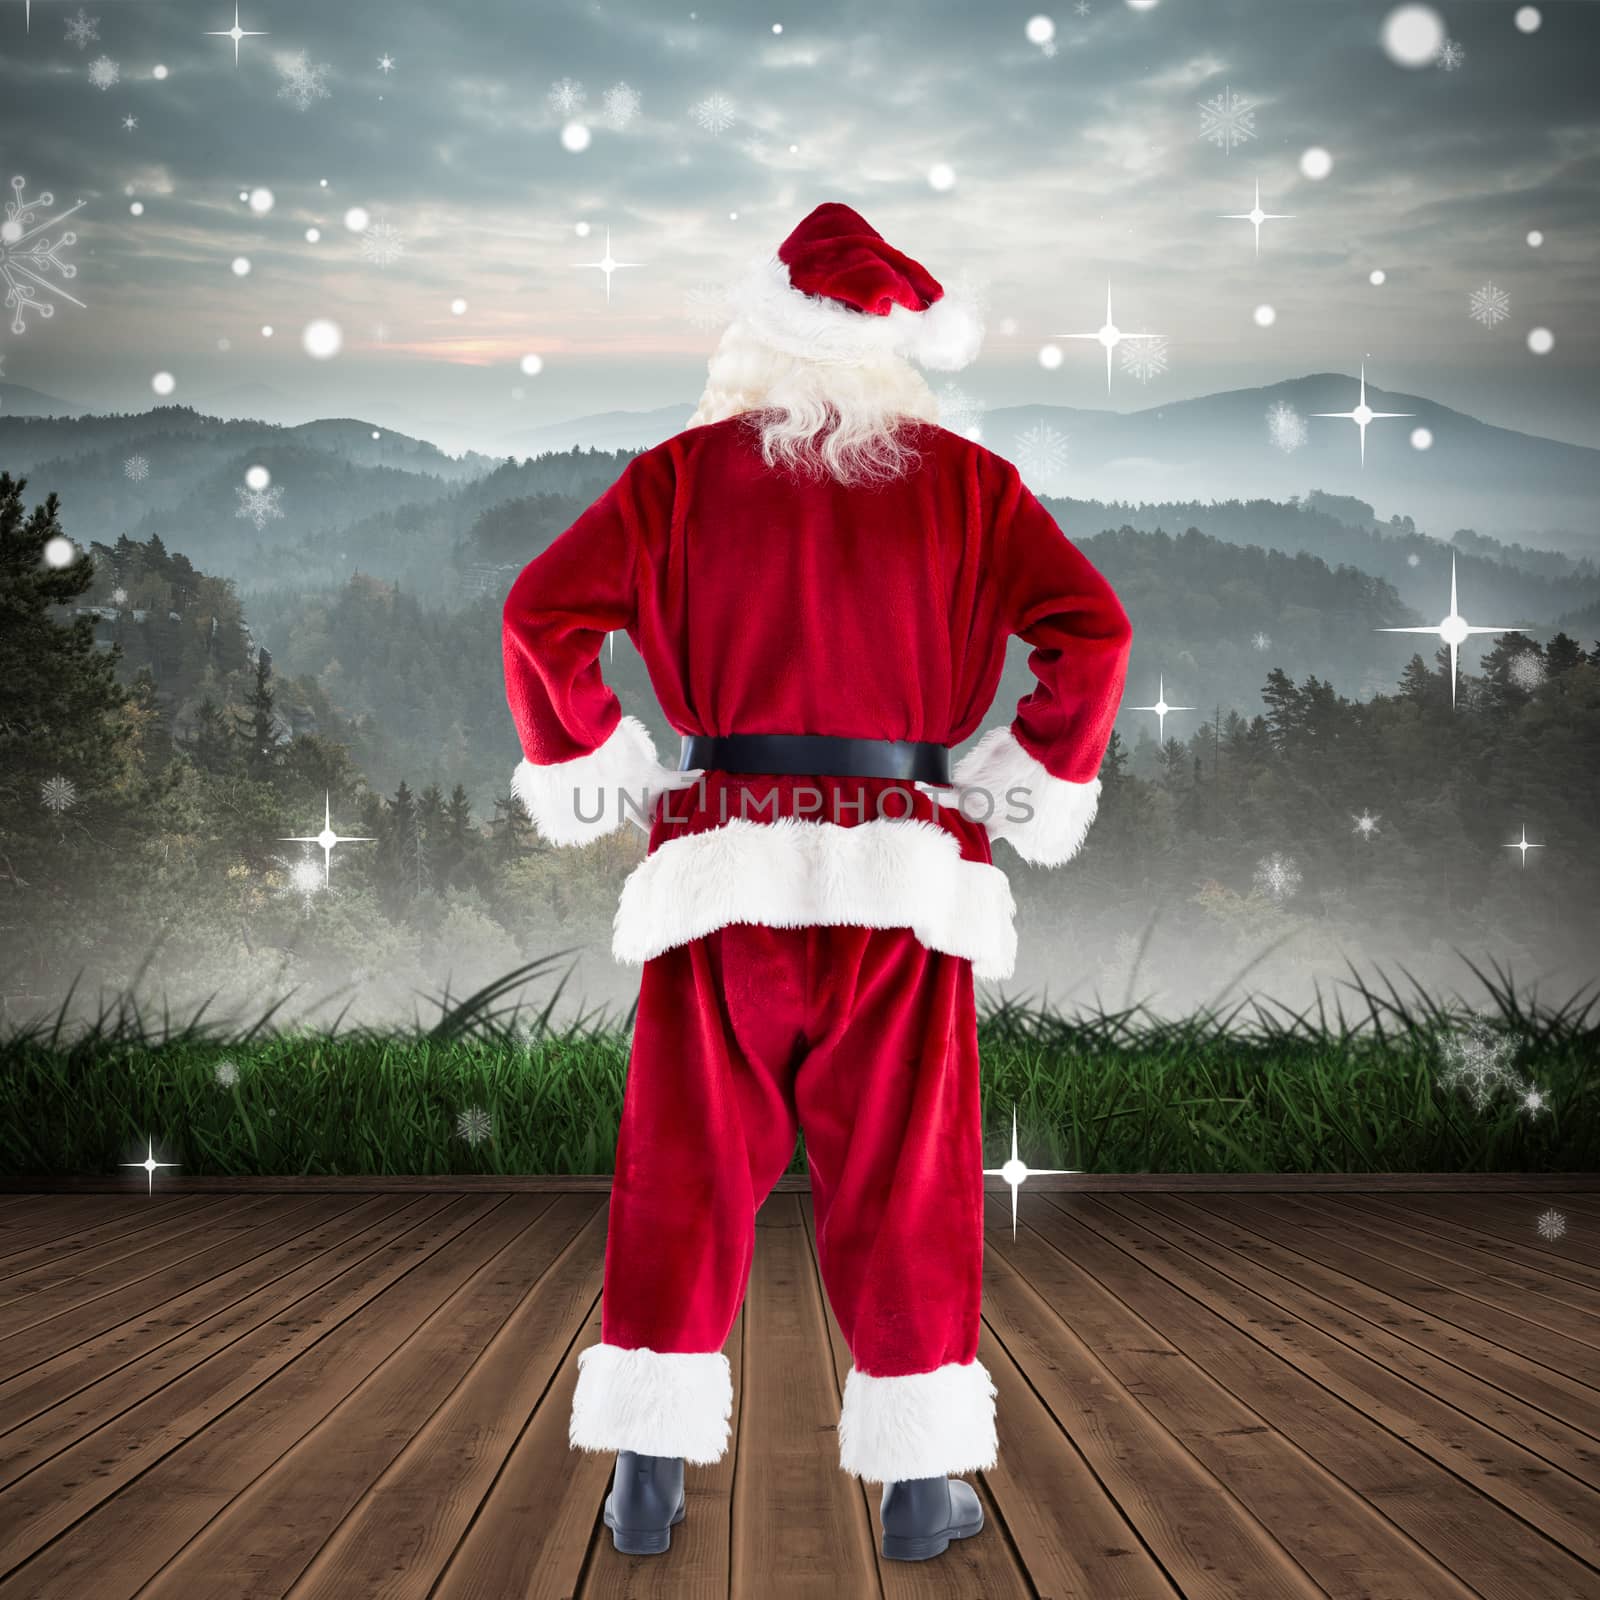 Santa standing with hands on hips against mountain range beyond wooden floor